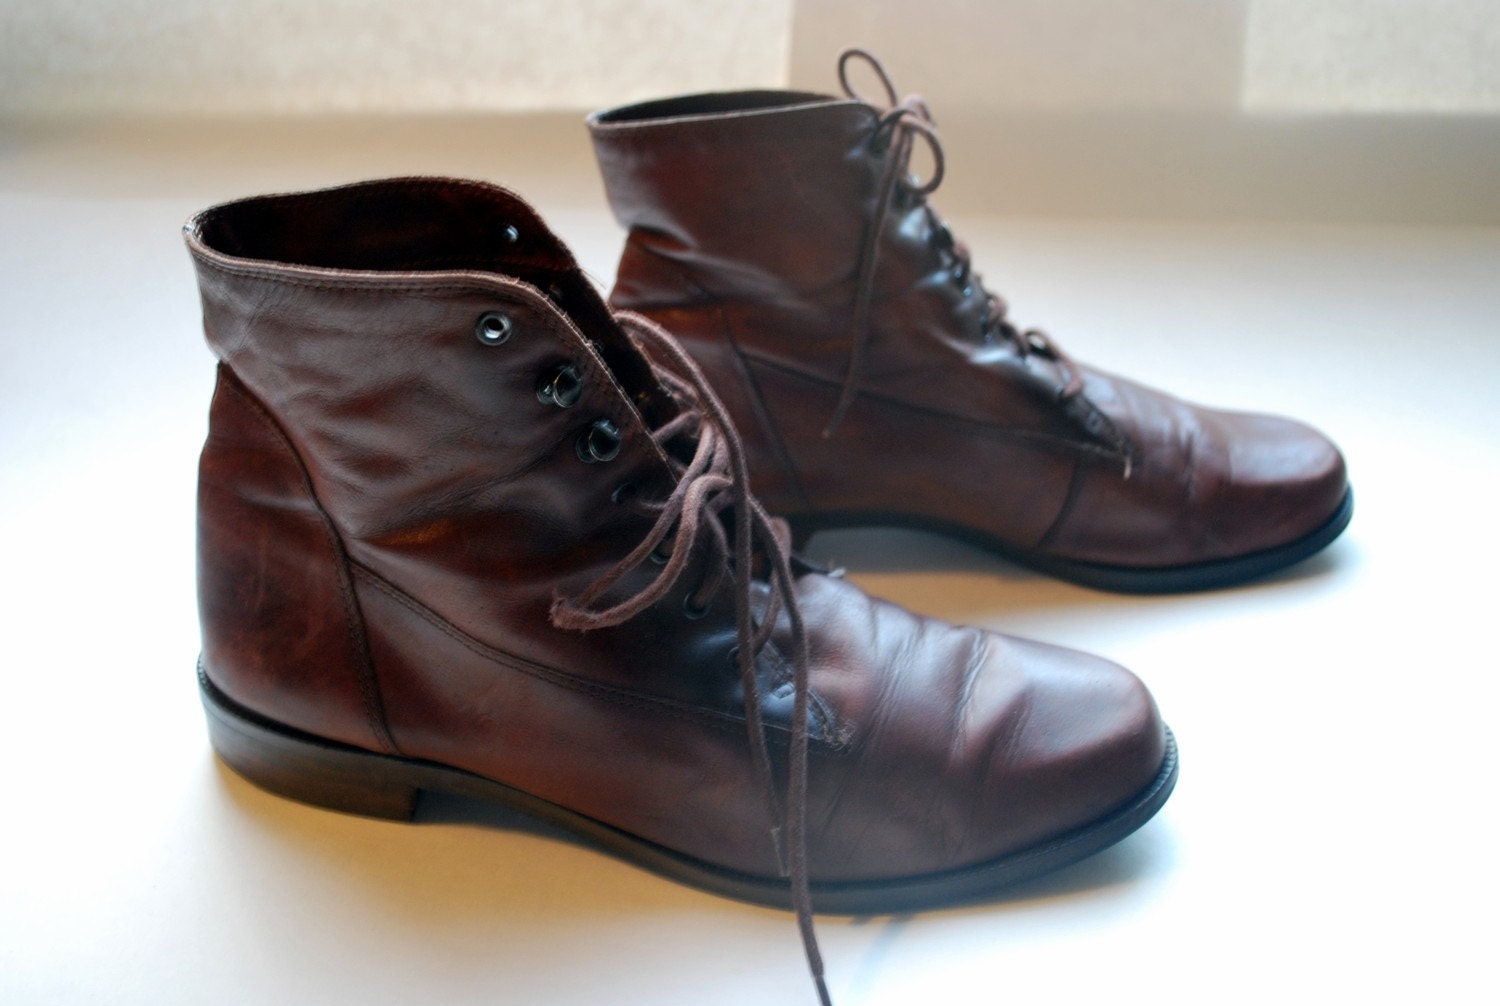 Simple and Supple brown leather granny boots .vintage lace up shoes by Nine West in 8 1/2 it seems